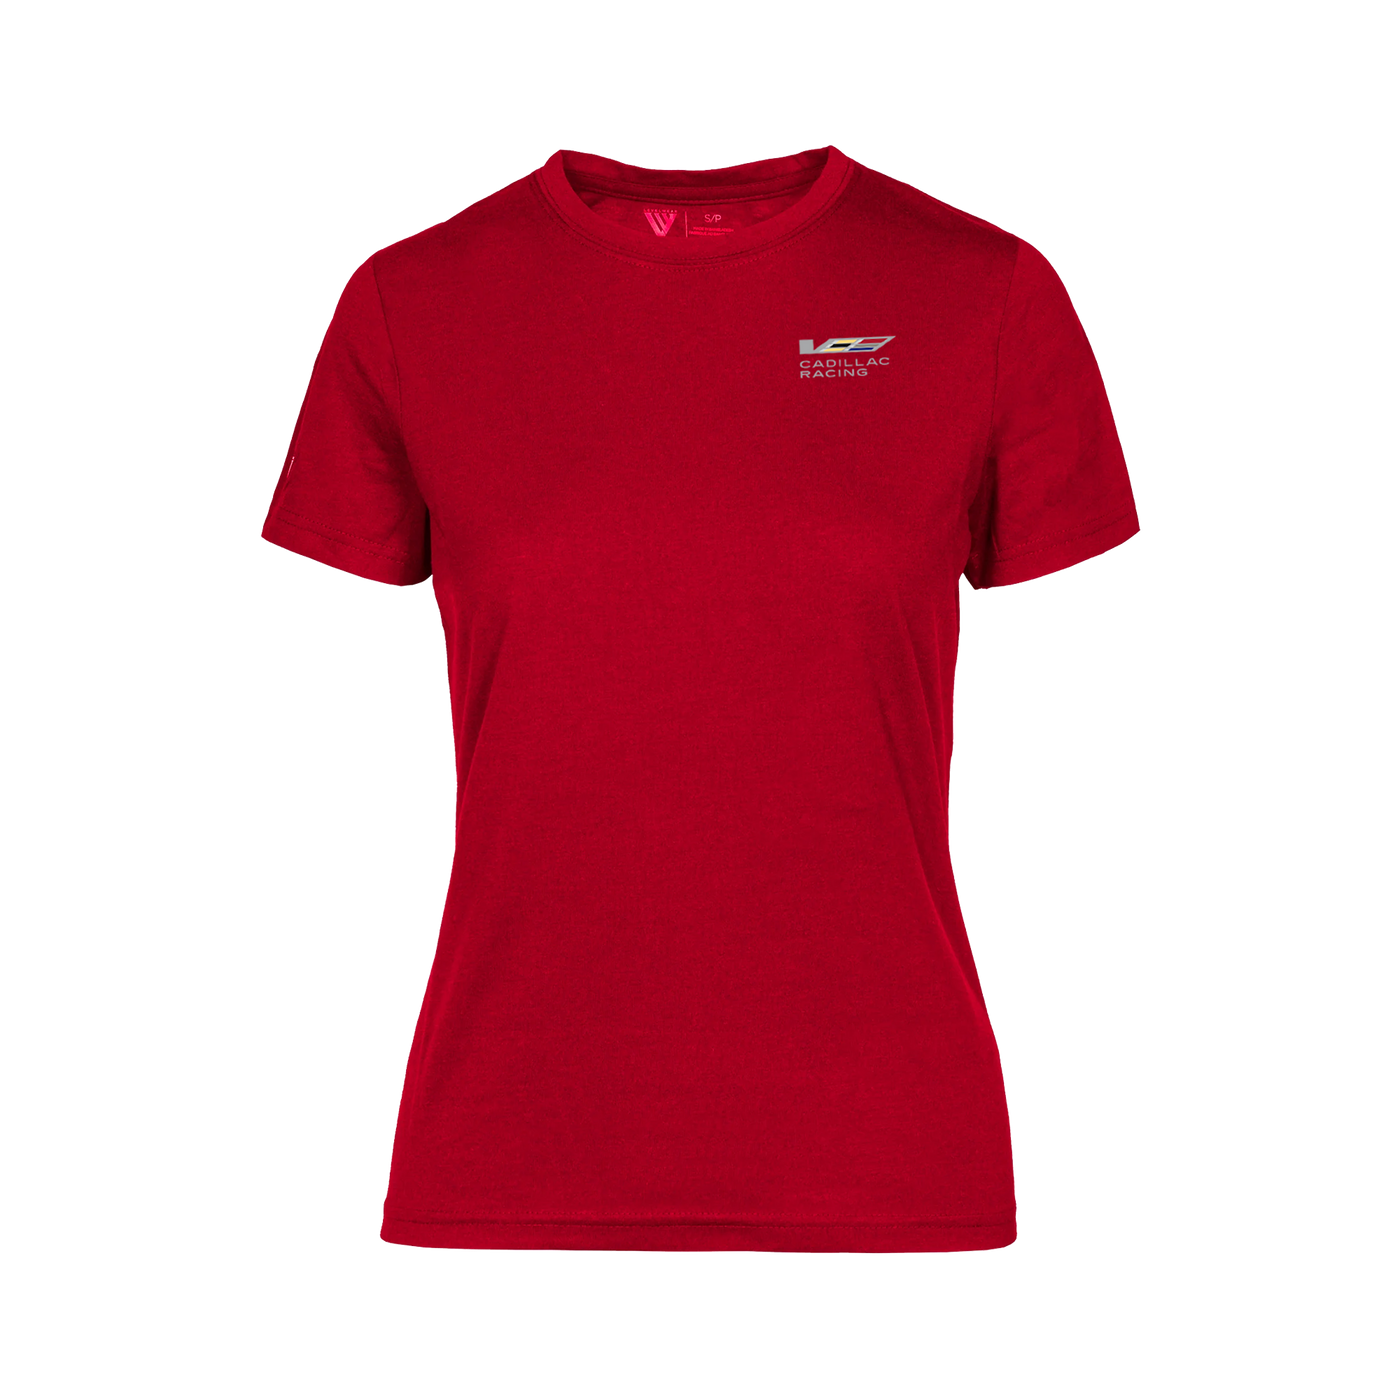 Cadillac Racing Women's Maddox Crew Neck Tee by Levelwear